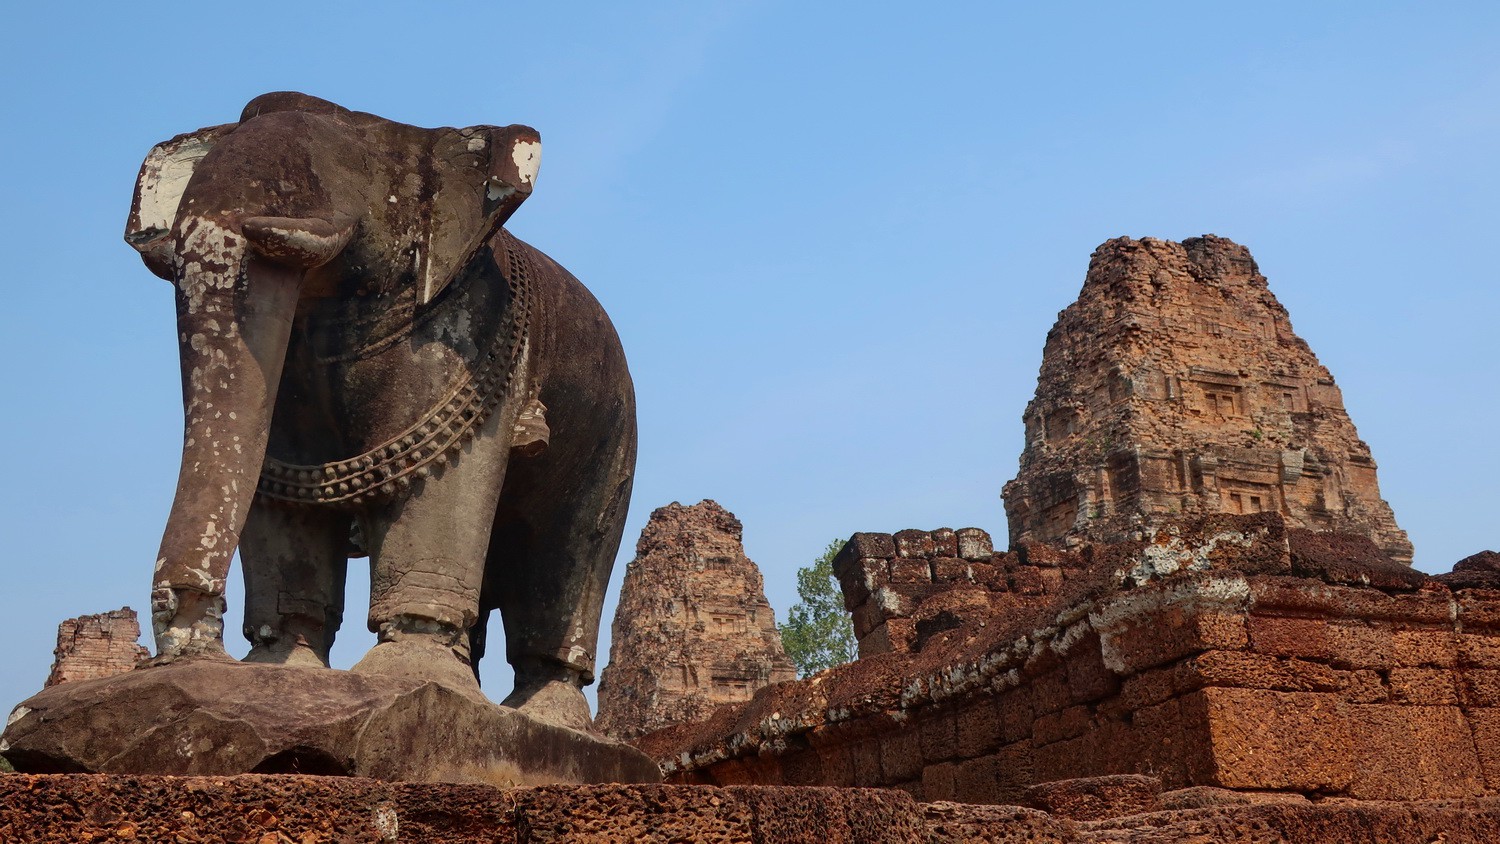 Elephant in the East Mebon Ruins which is one of the oldest parts of the Angkor Wat complex (built between the years 944 and 968)